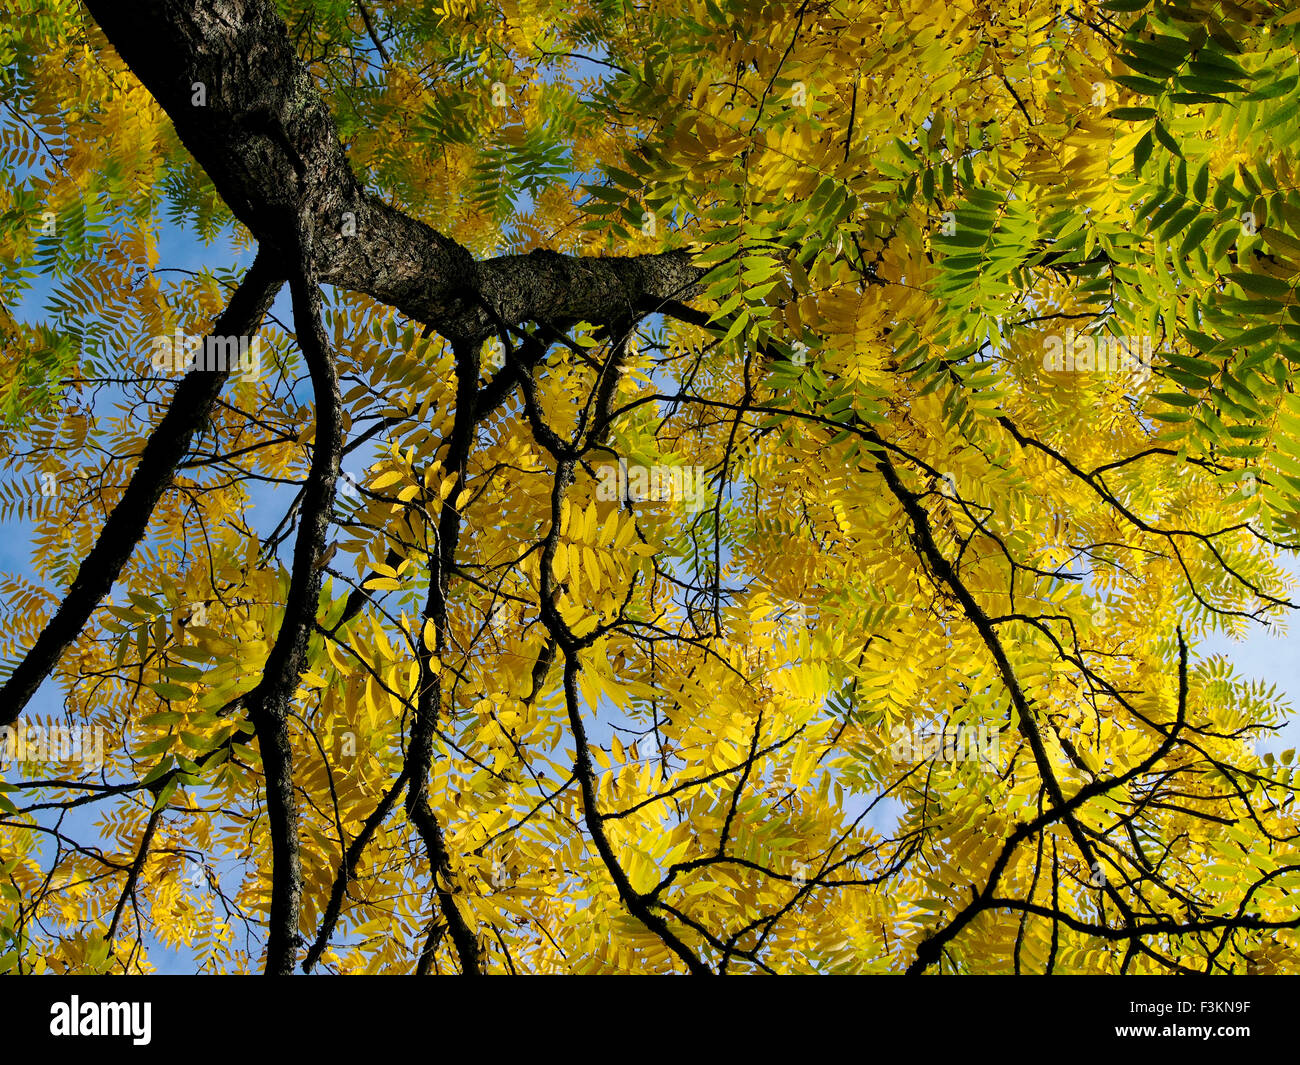 Glorious autumn yellow leaves of a Juglans Nigra (Eastern Black Walnut) tree, a native of eastern and central USA Stock Photo